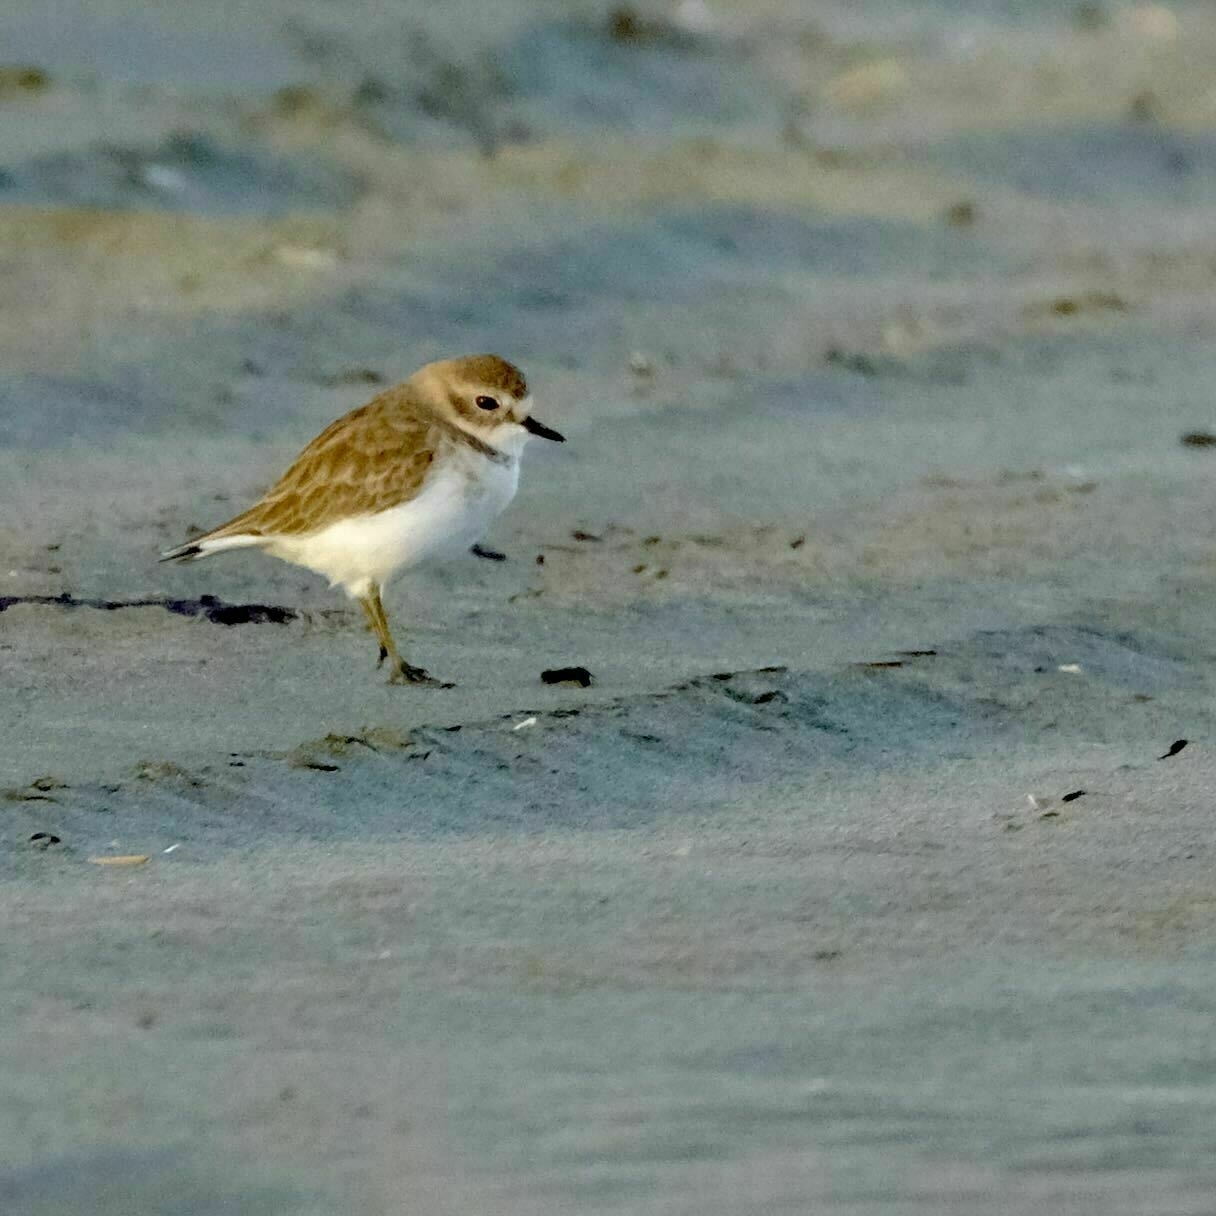 Small bird on the beach, with brown above and white below. 